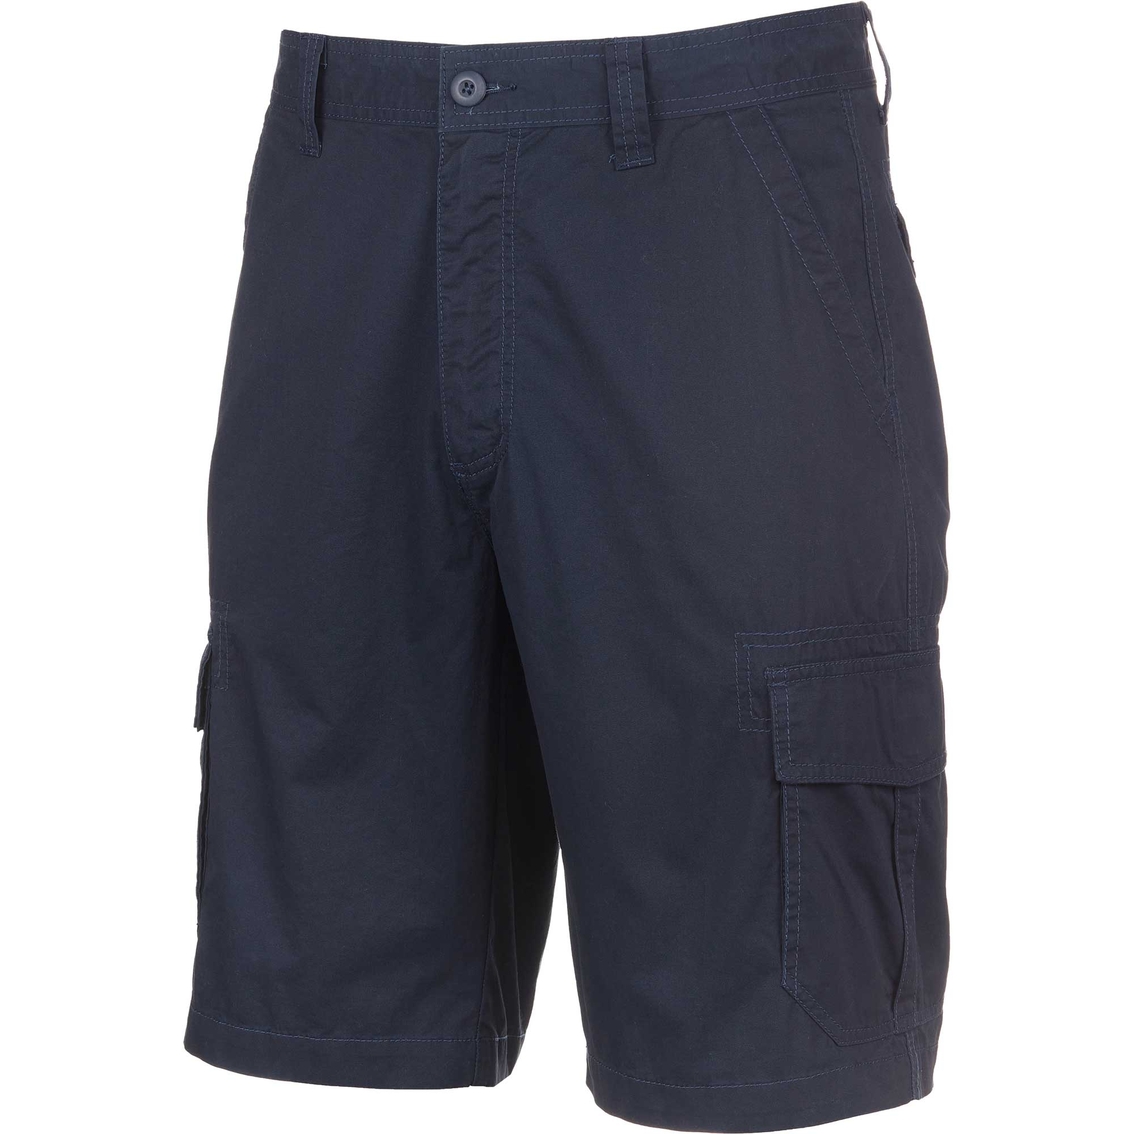 Do Not Use See Crc 2632461 Big Sky Outfitters Cargo Shorts ...